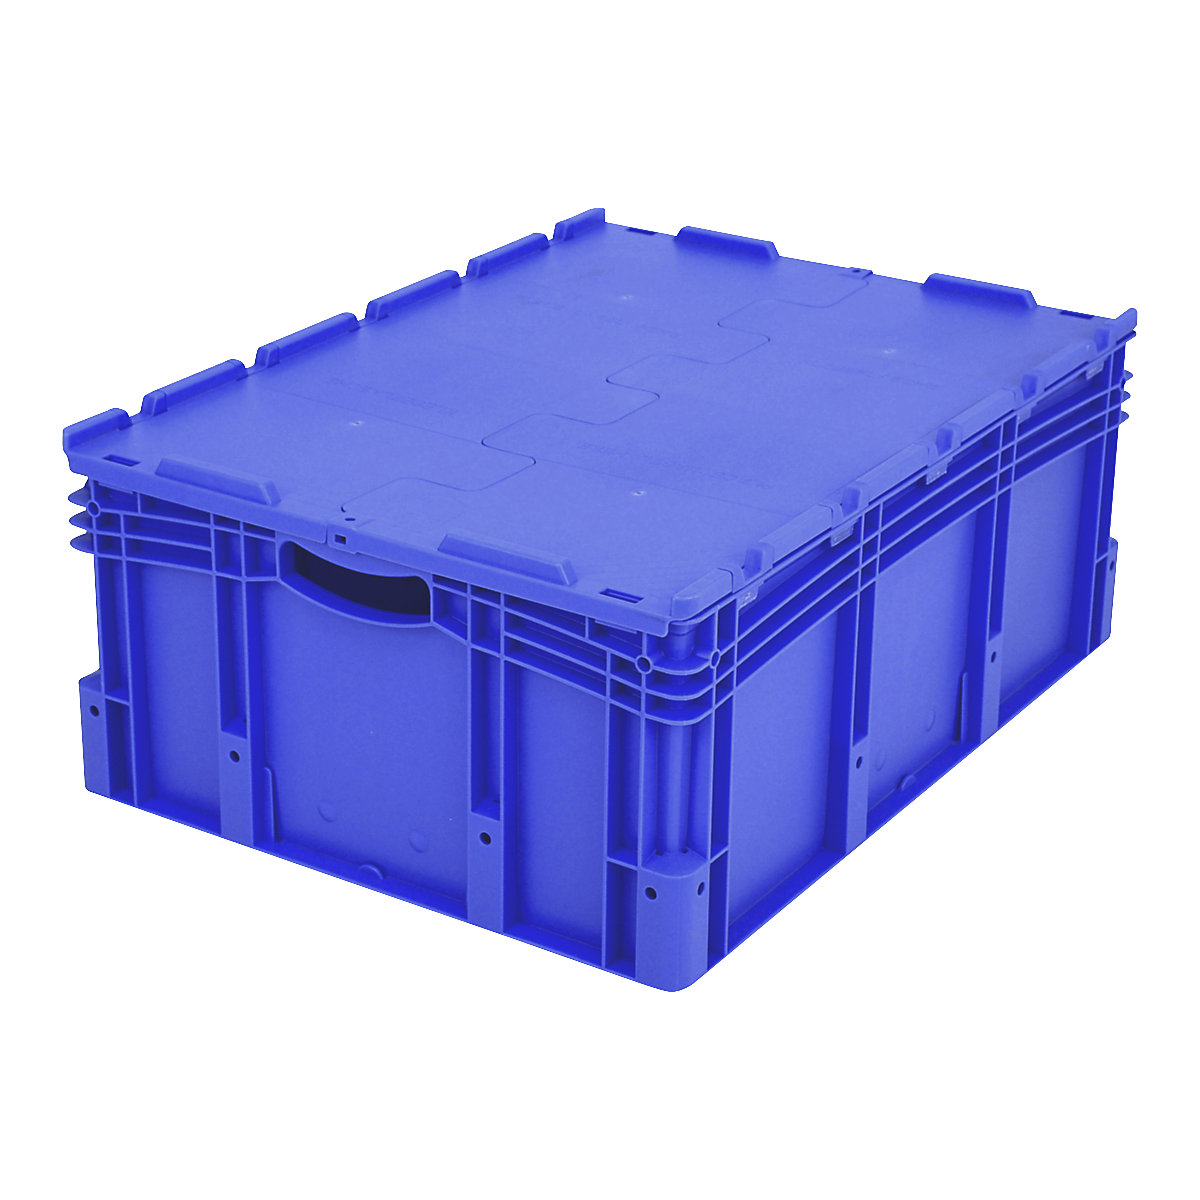 XL Euro stacking container – BITO, with 2-section hinged lid, LxWxH 800 x 600 x 338 mm-6